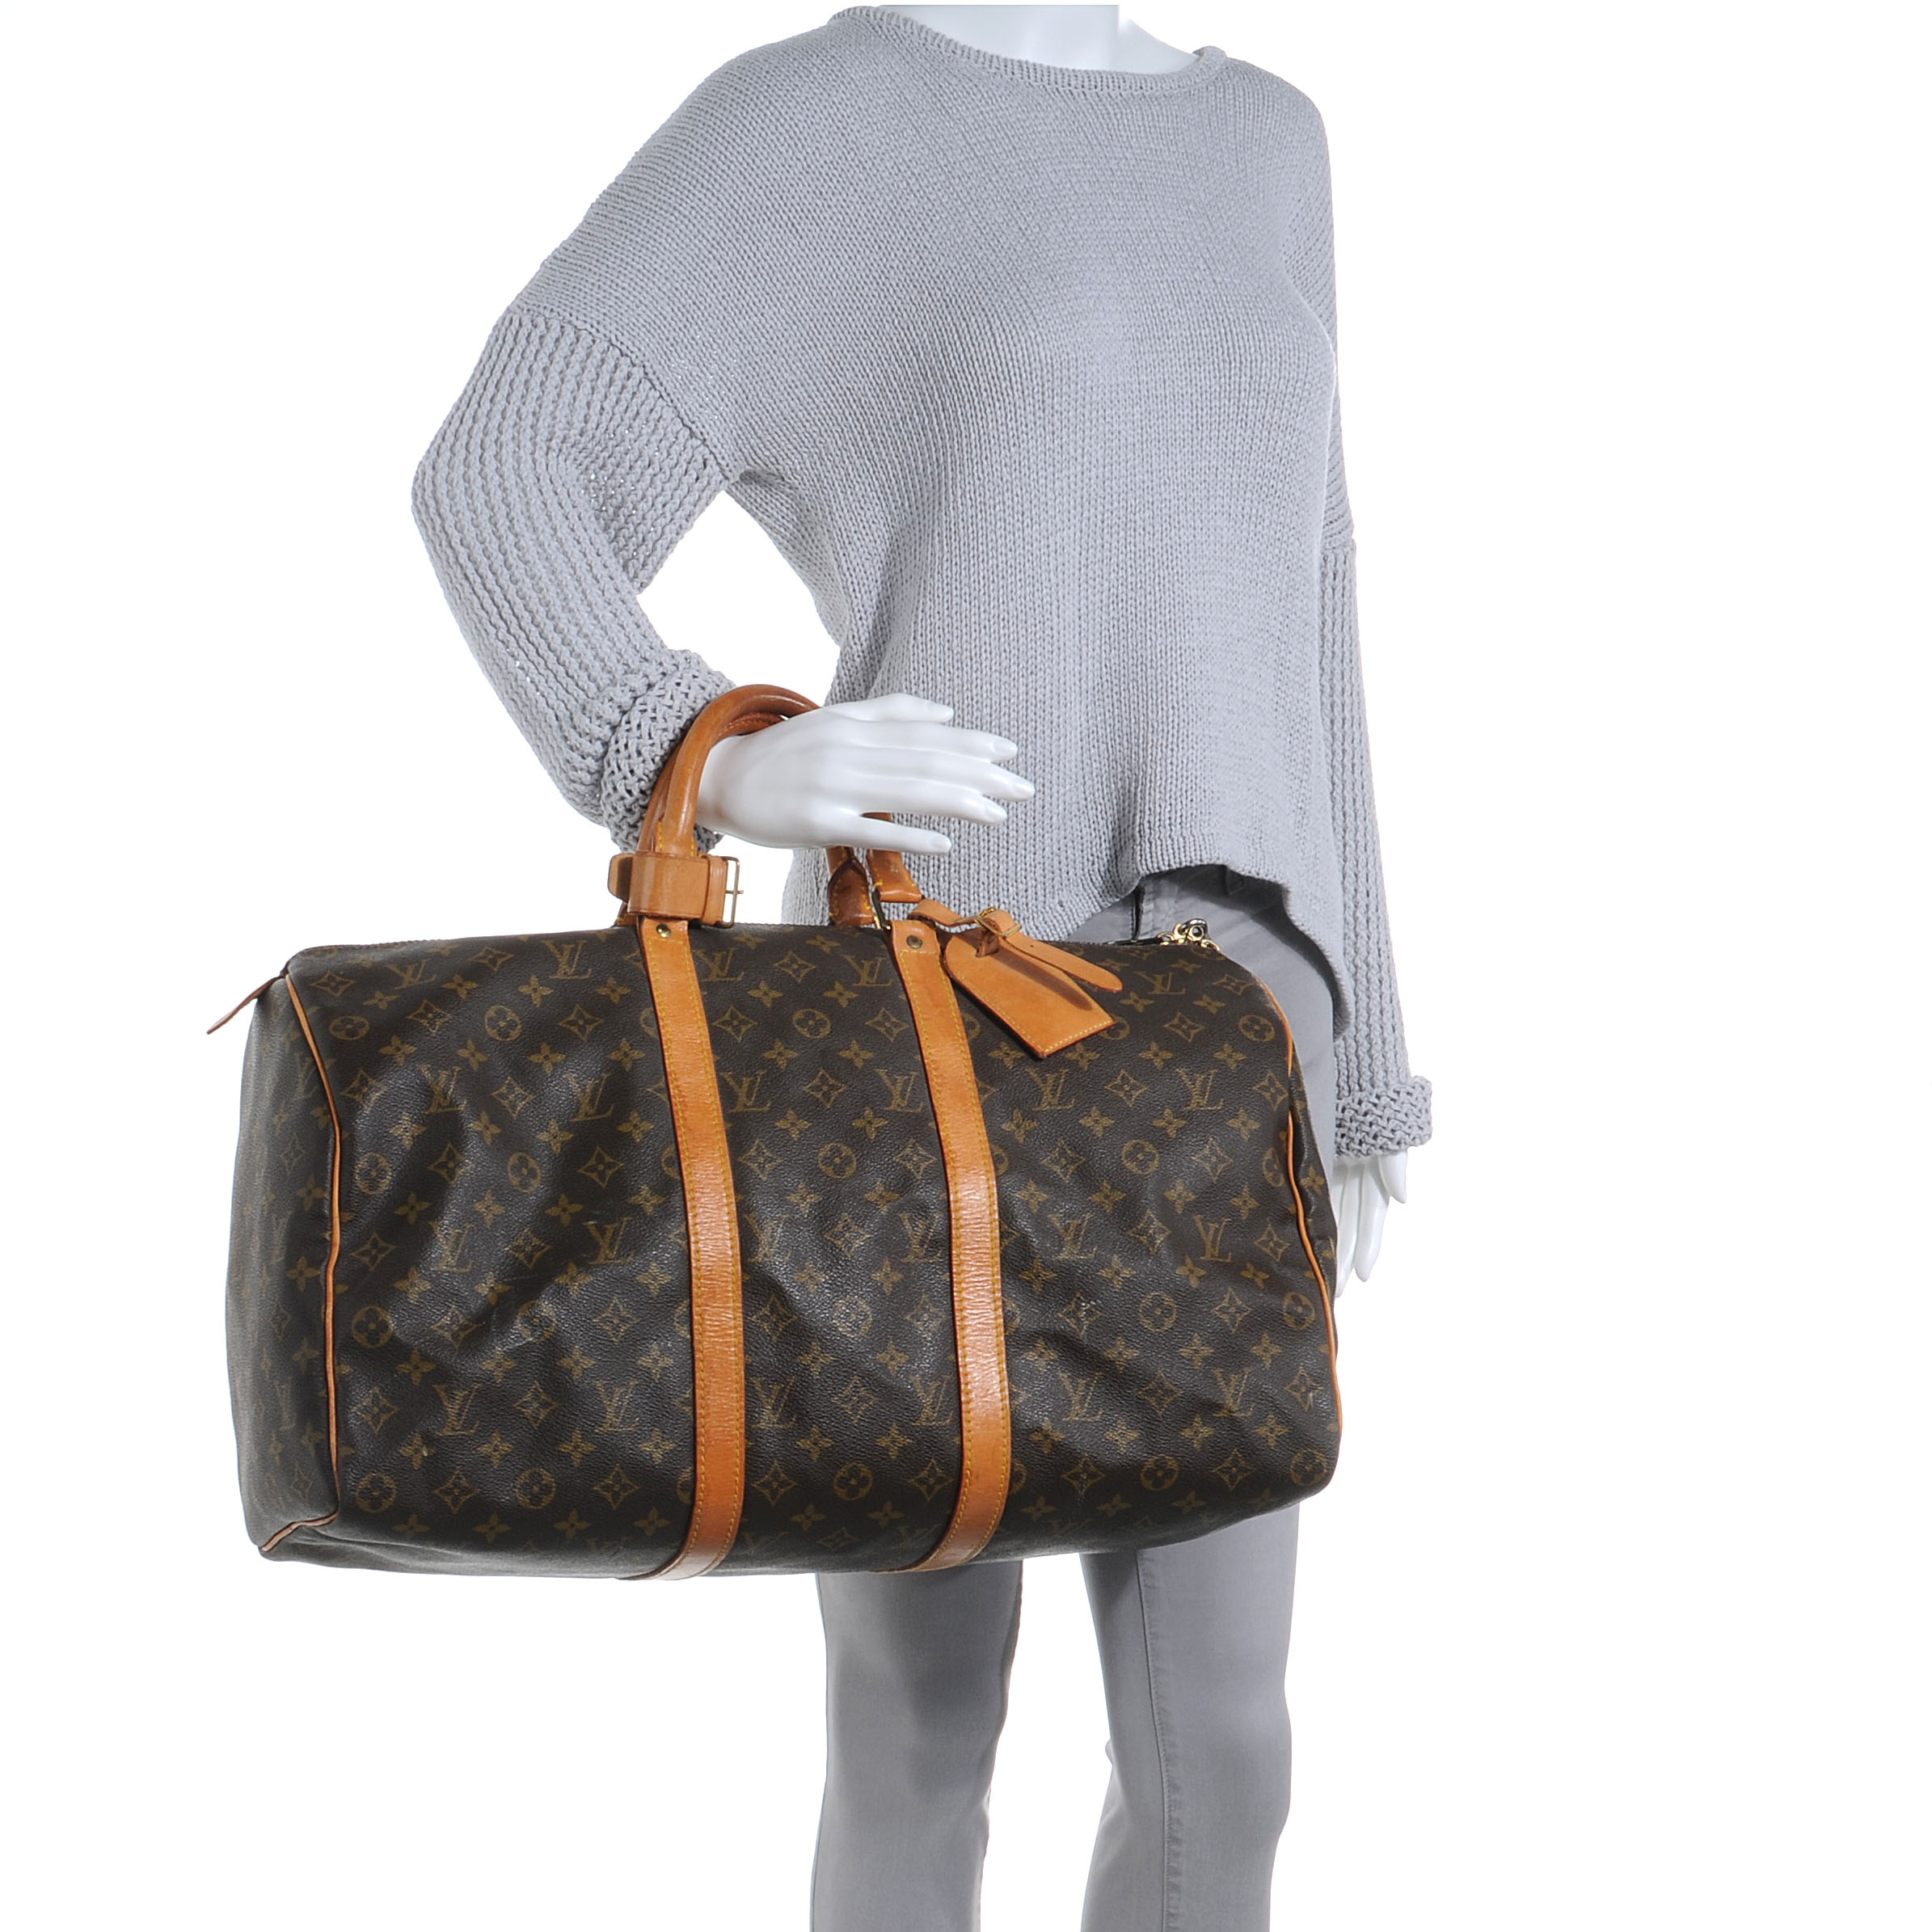 Lv Keepall 50 Price  Natural Resource Department